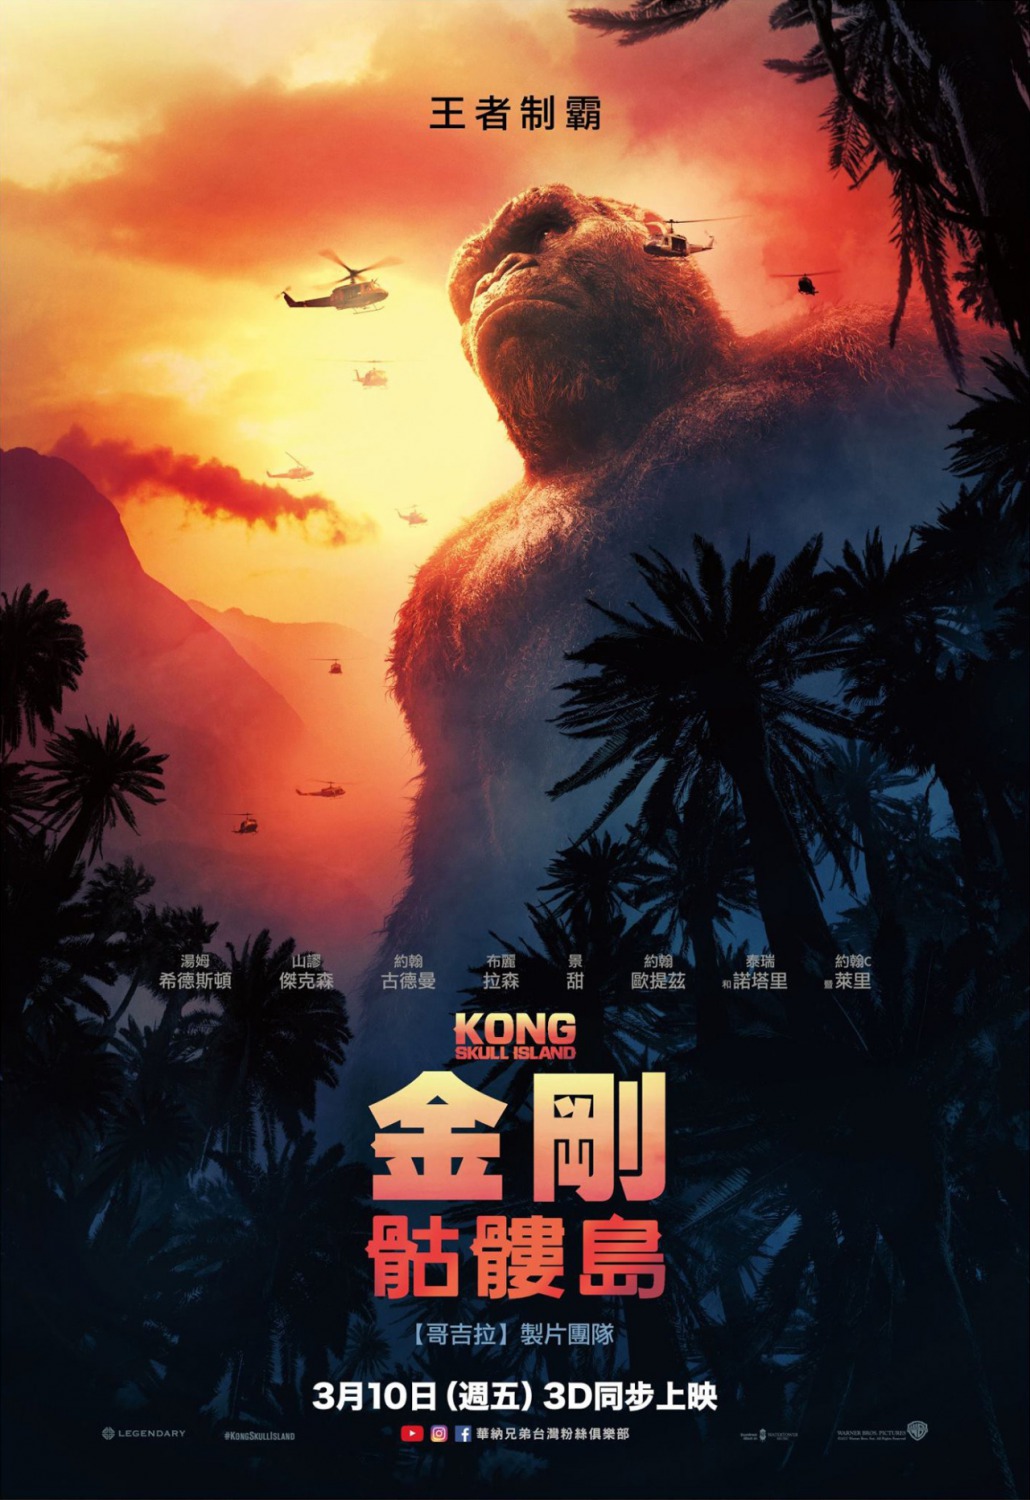 Kong Skull Island Chinese Posters Are Predictably Awesome